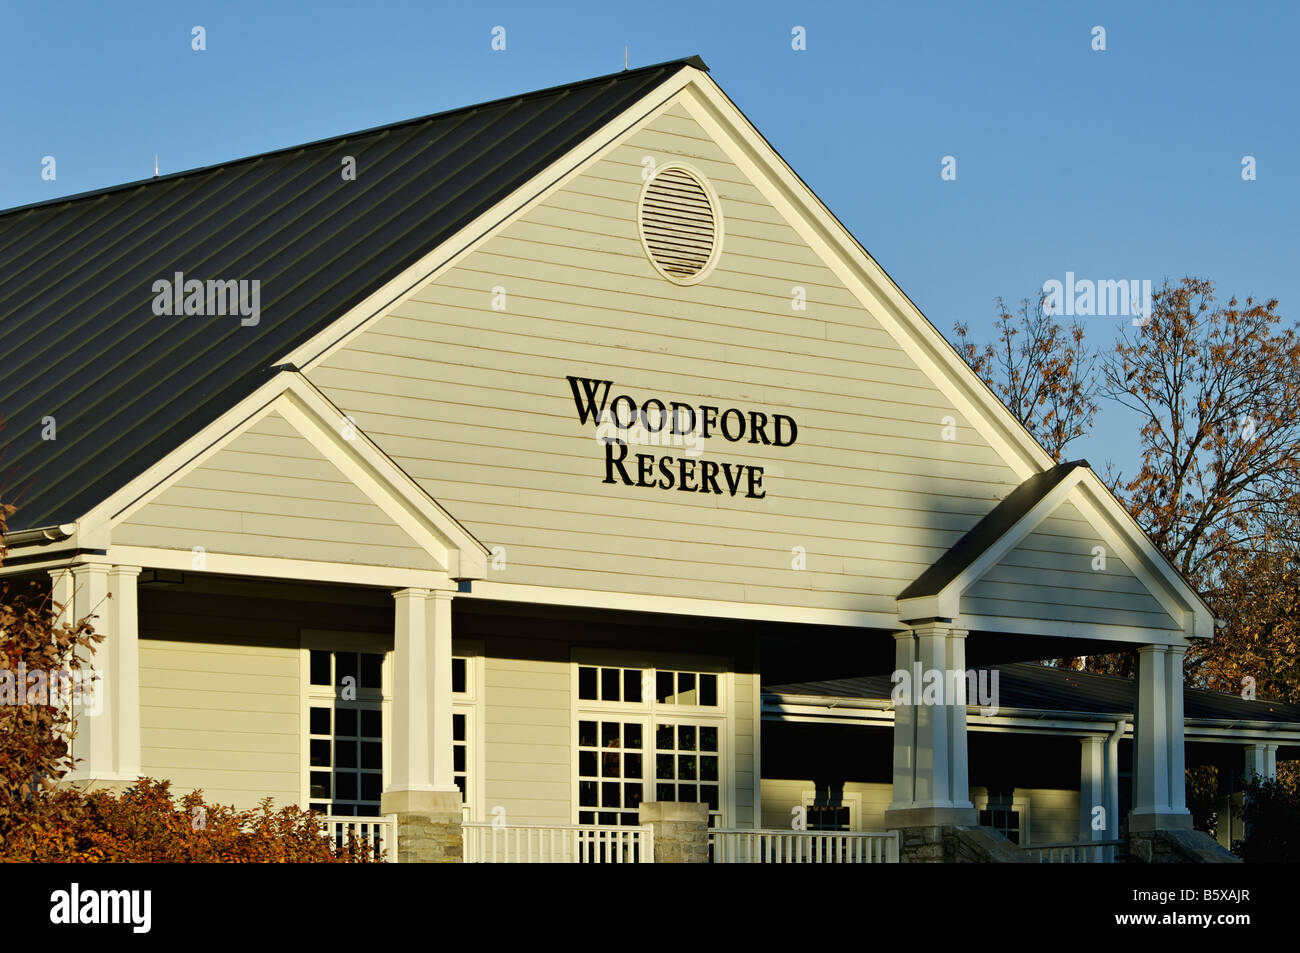 Woodford Reserve Woodford County Distillery en Ohio Banque D'Images